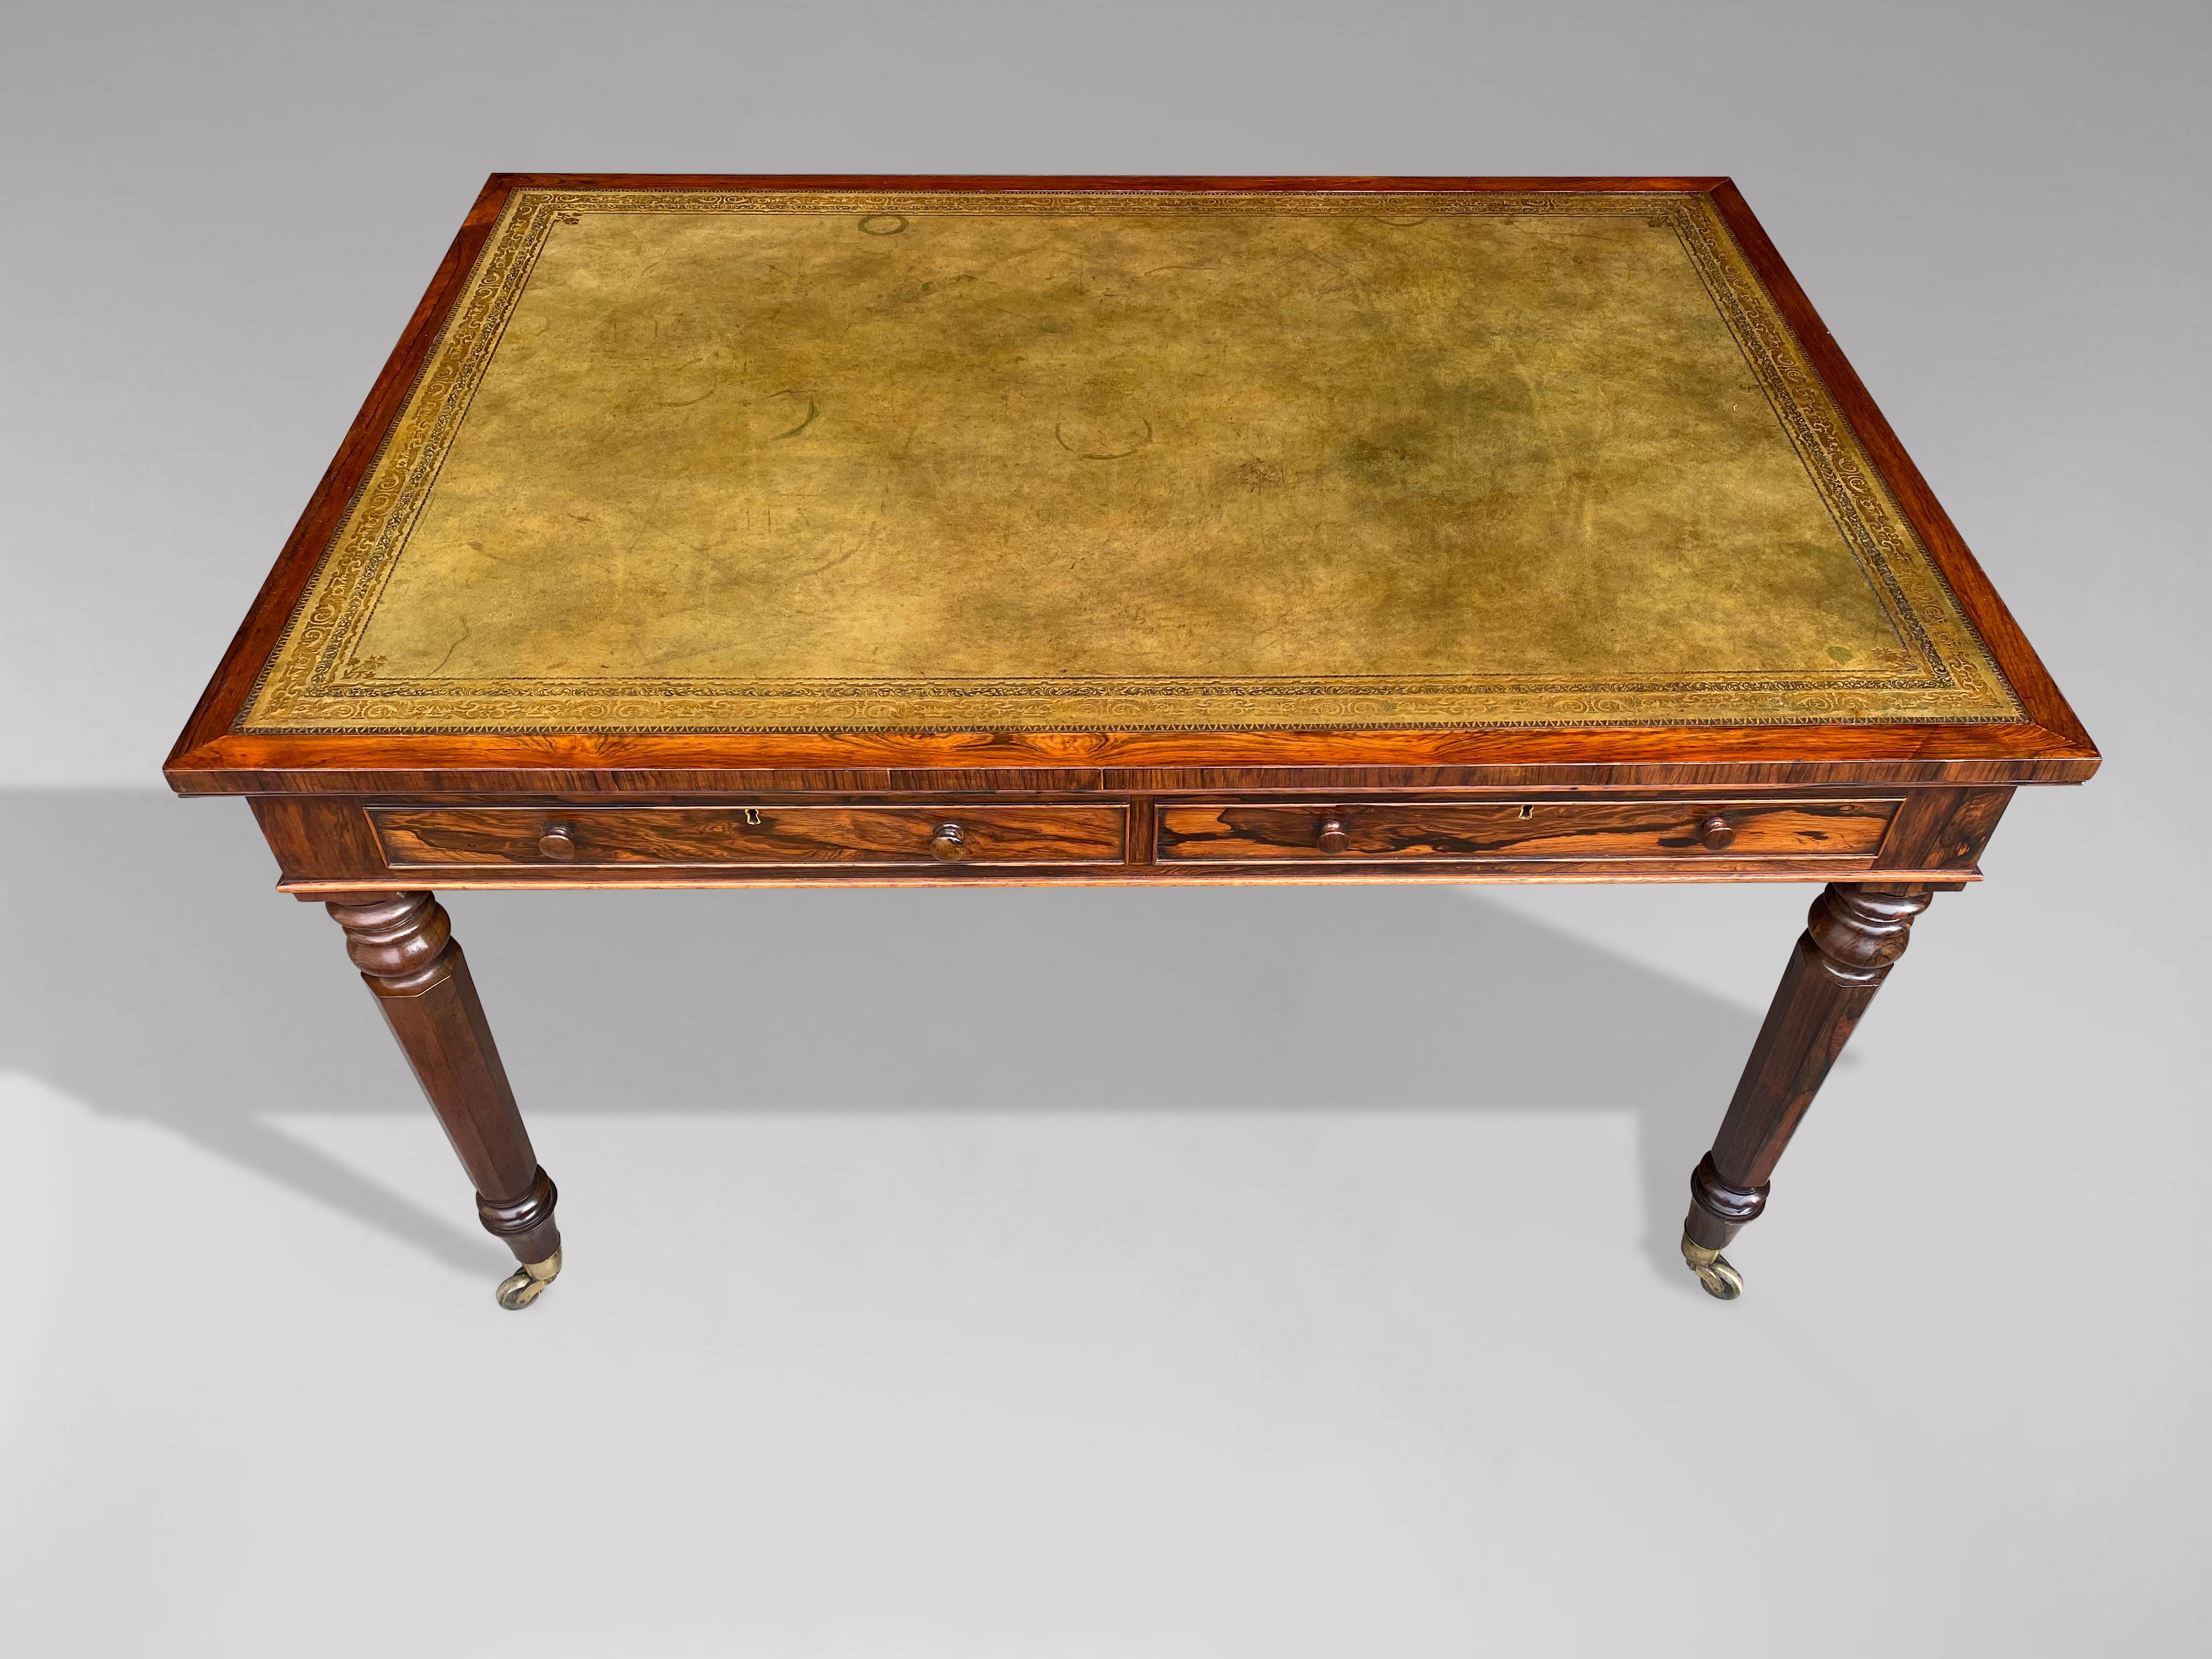 British 19th Century, Regency Period Rosewood Partners Writing Table